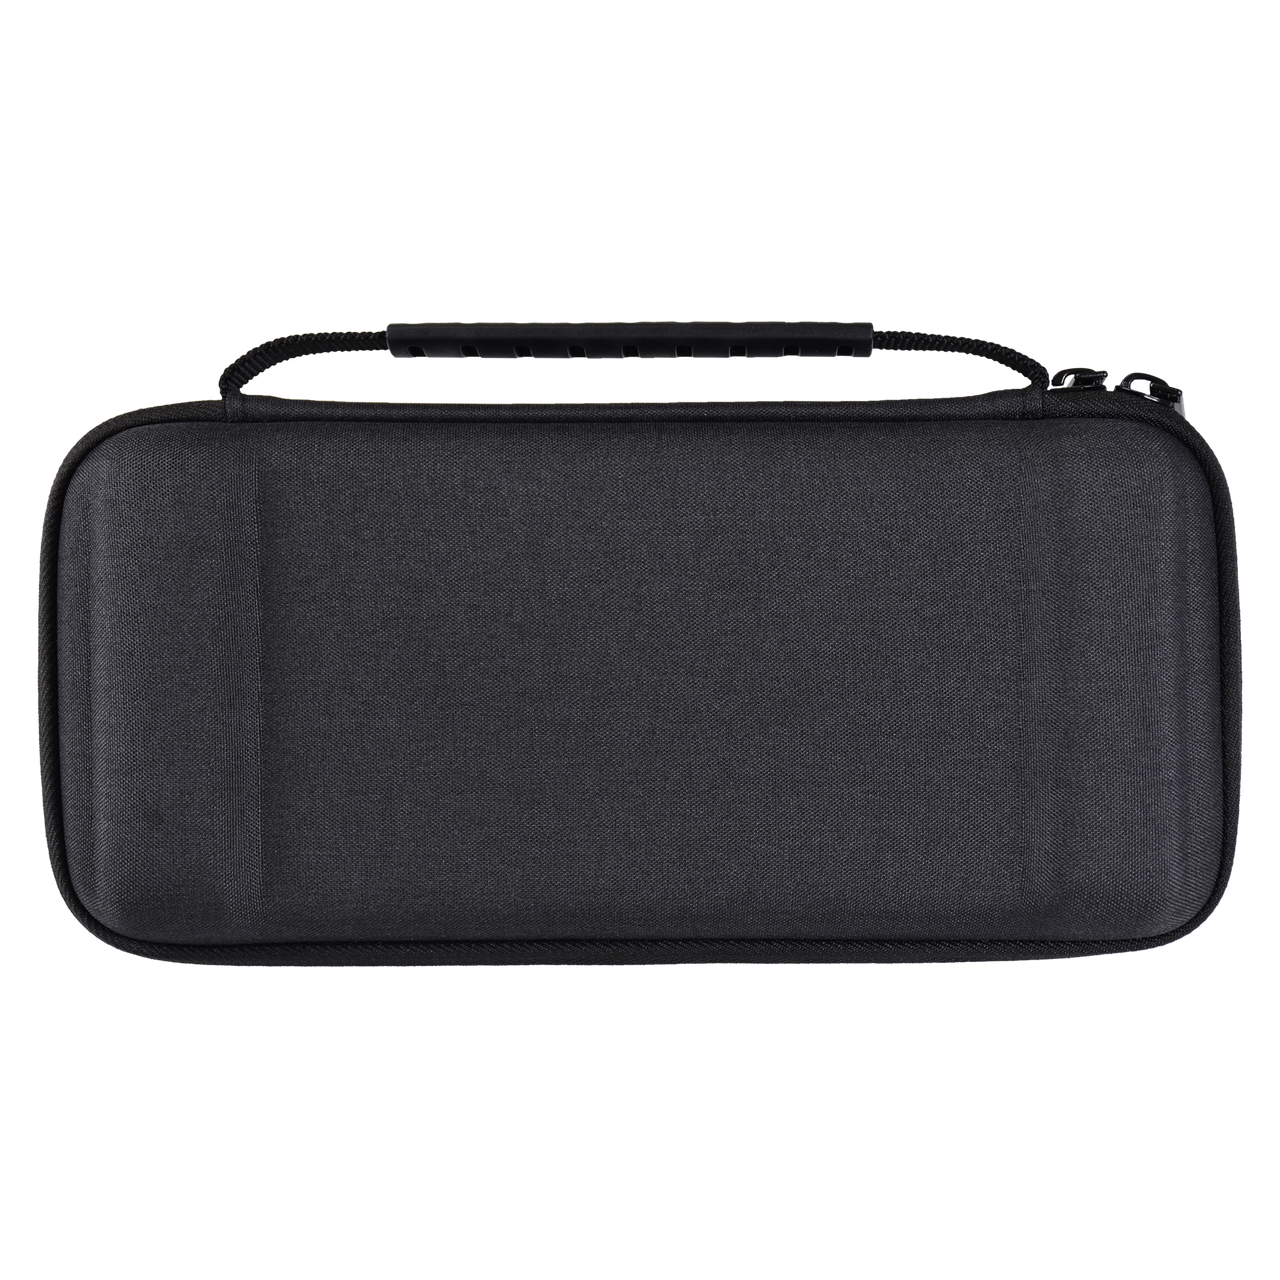 Slim Tough Pouch (Black) for Nintendo Switch / Nintendo Switch - OLED ...